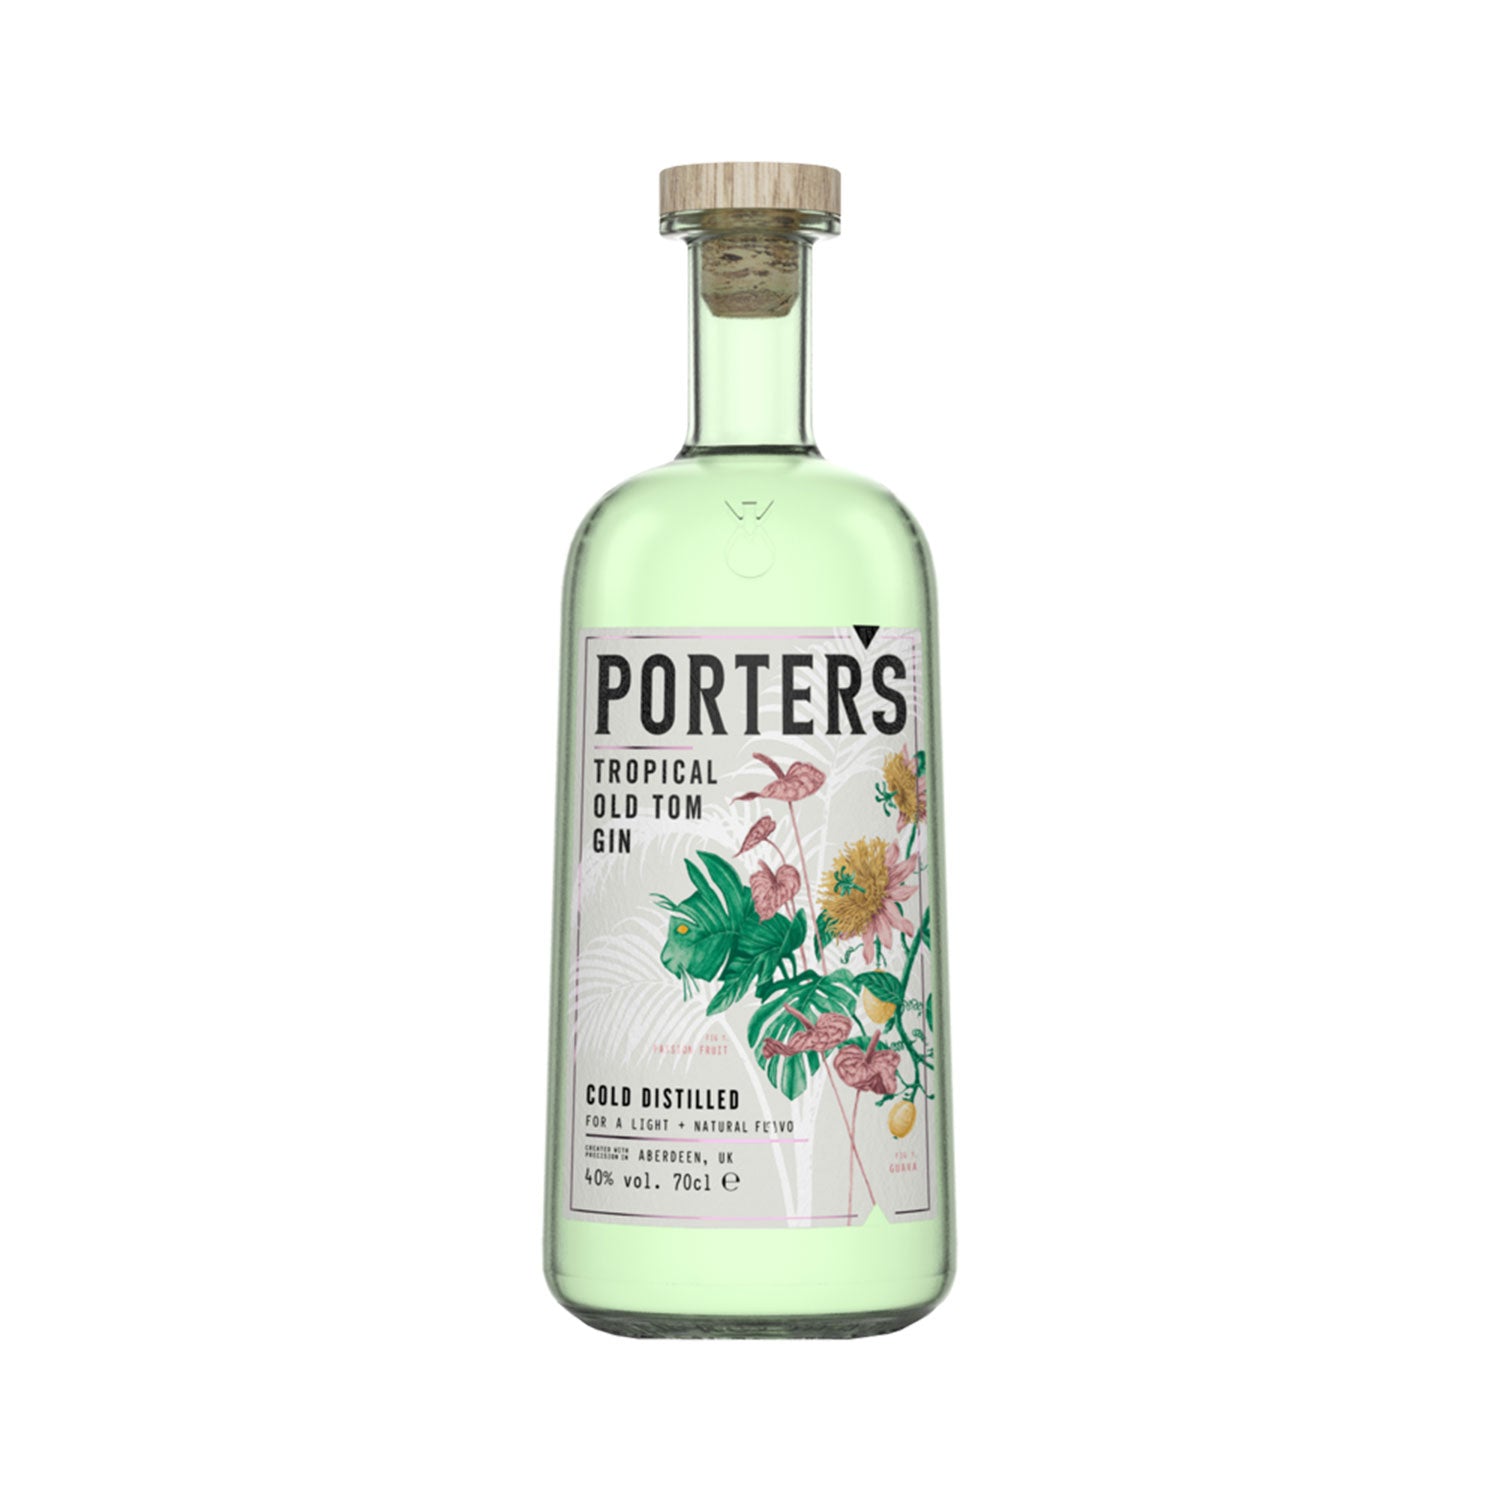 Porters Tropical Old Tom Gin 700ml